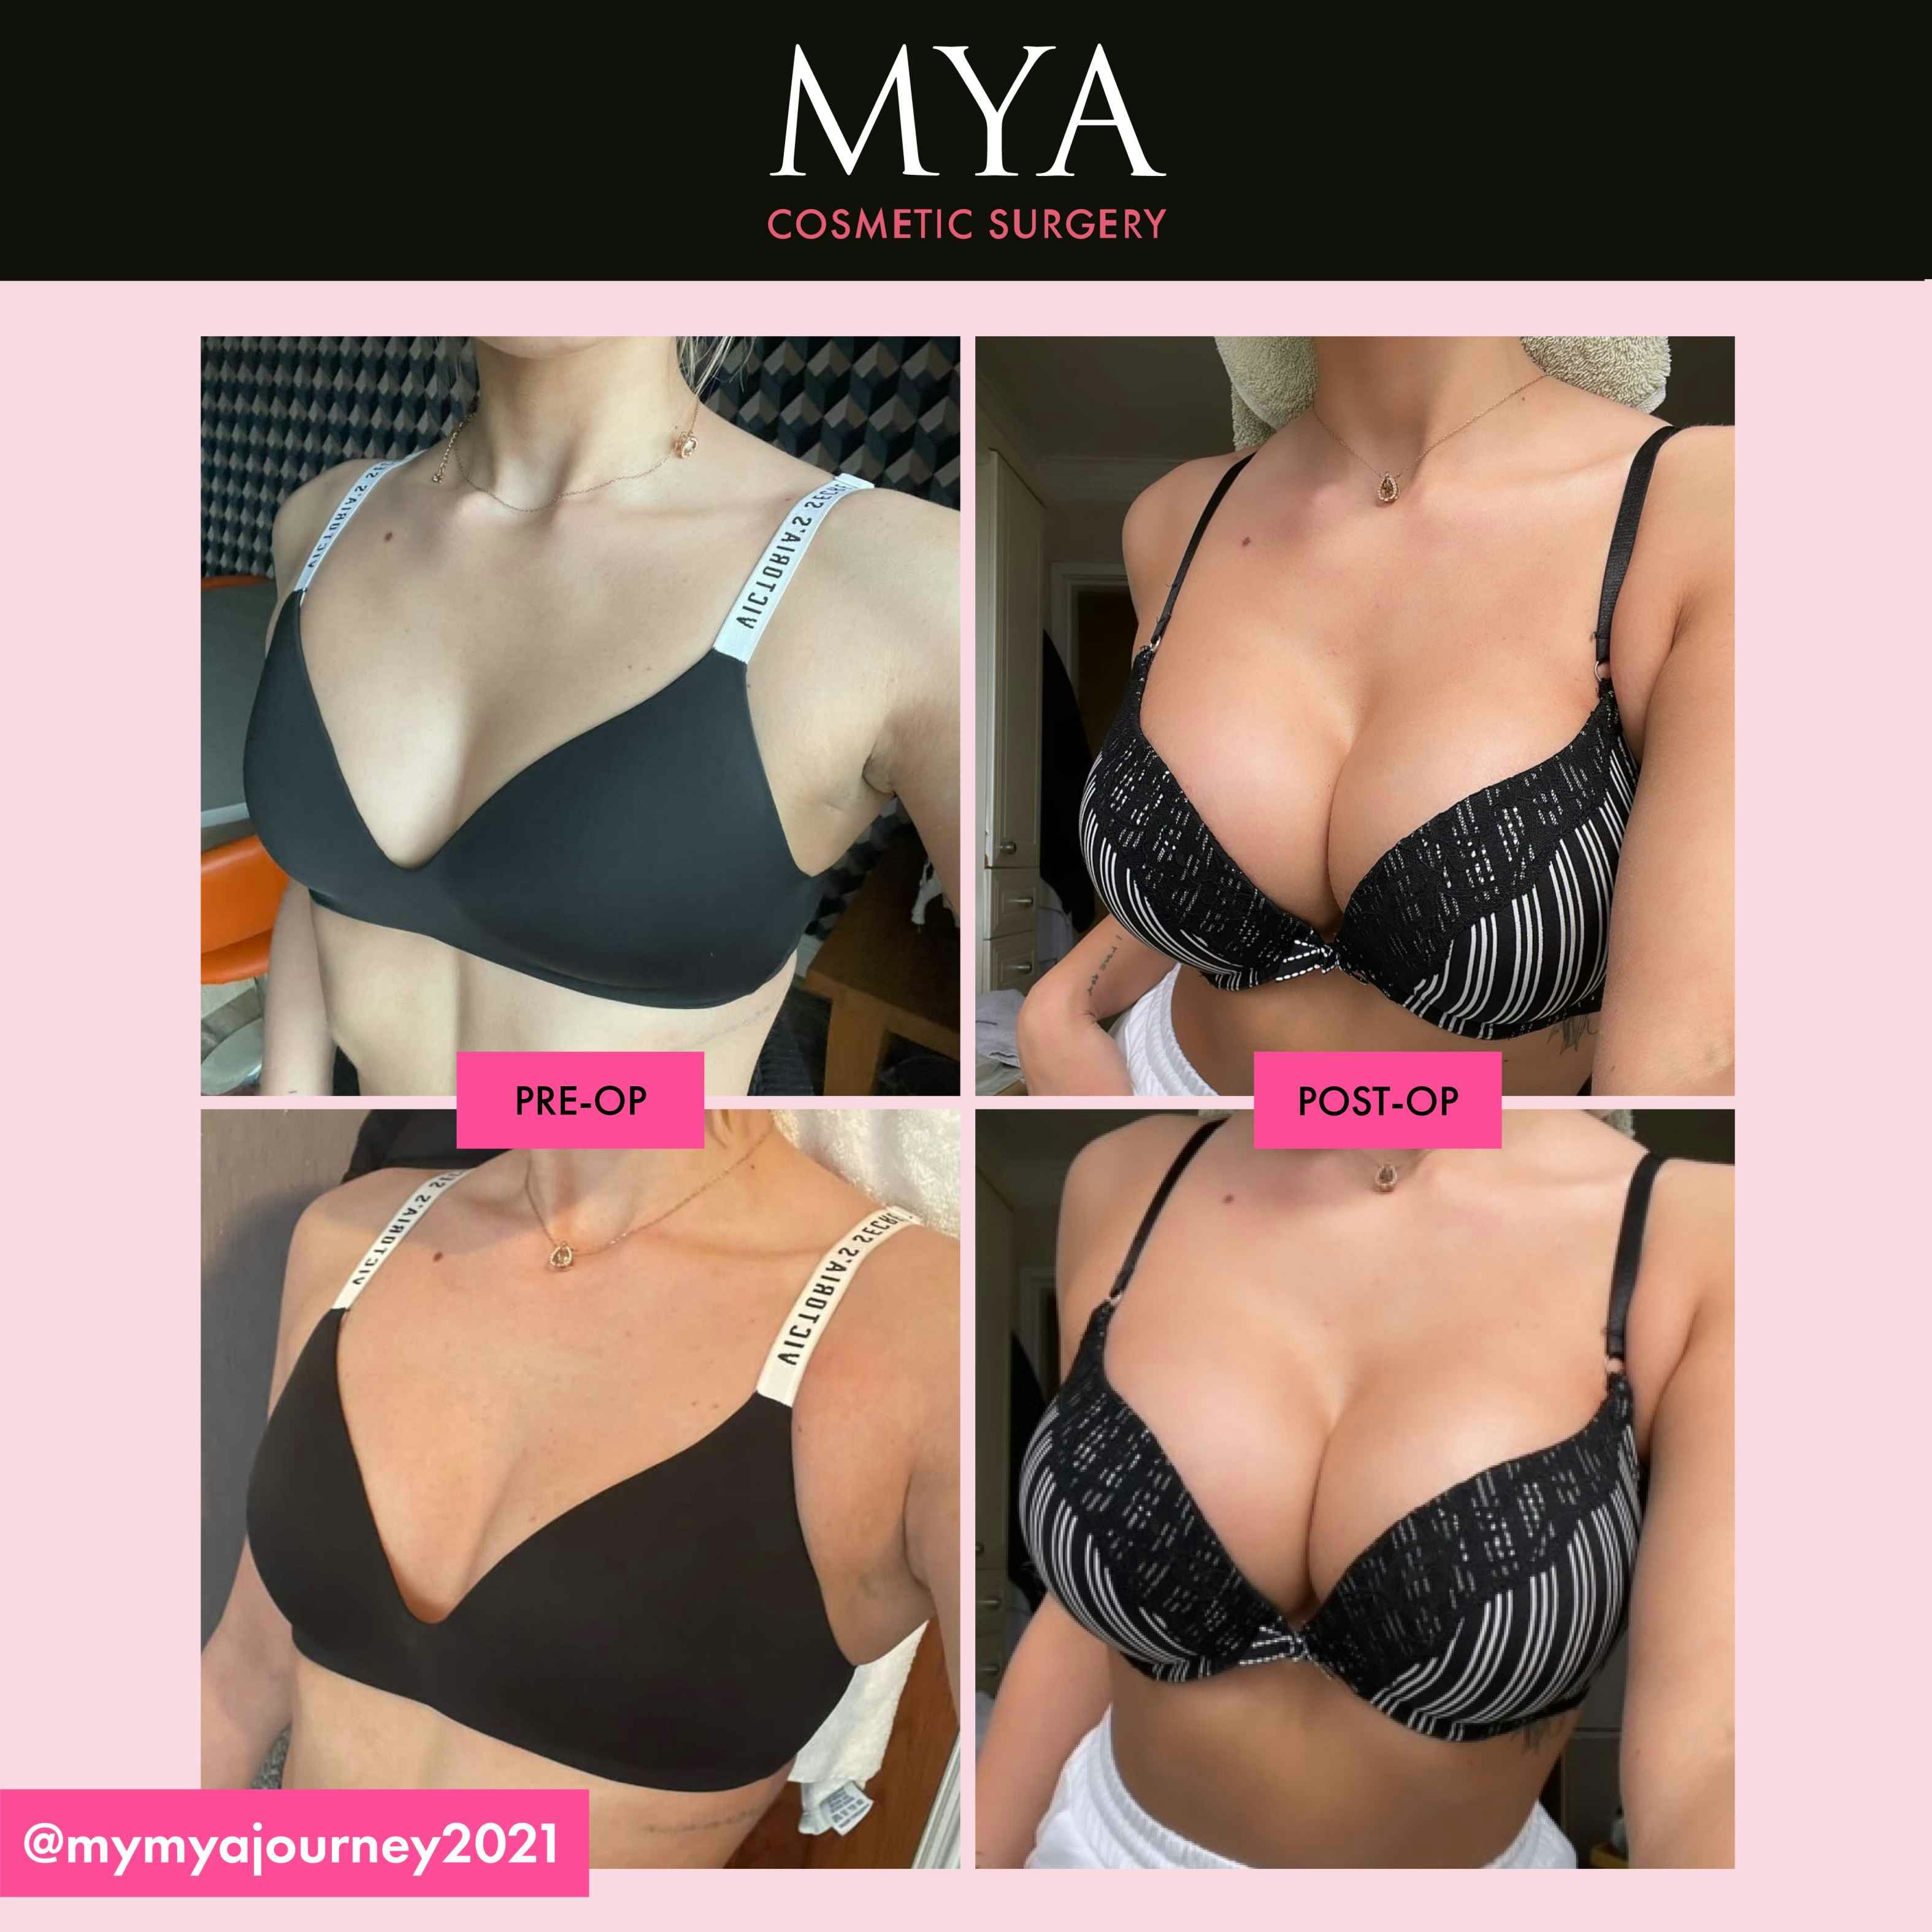 Breast Enlargement Before and After - MYA Cosmetic Surgery